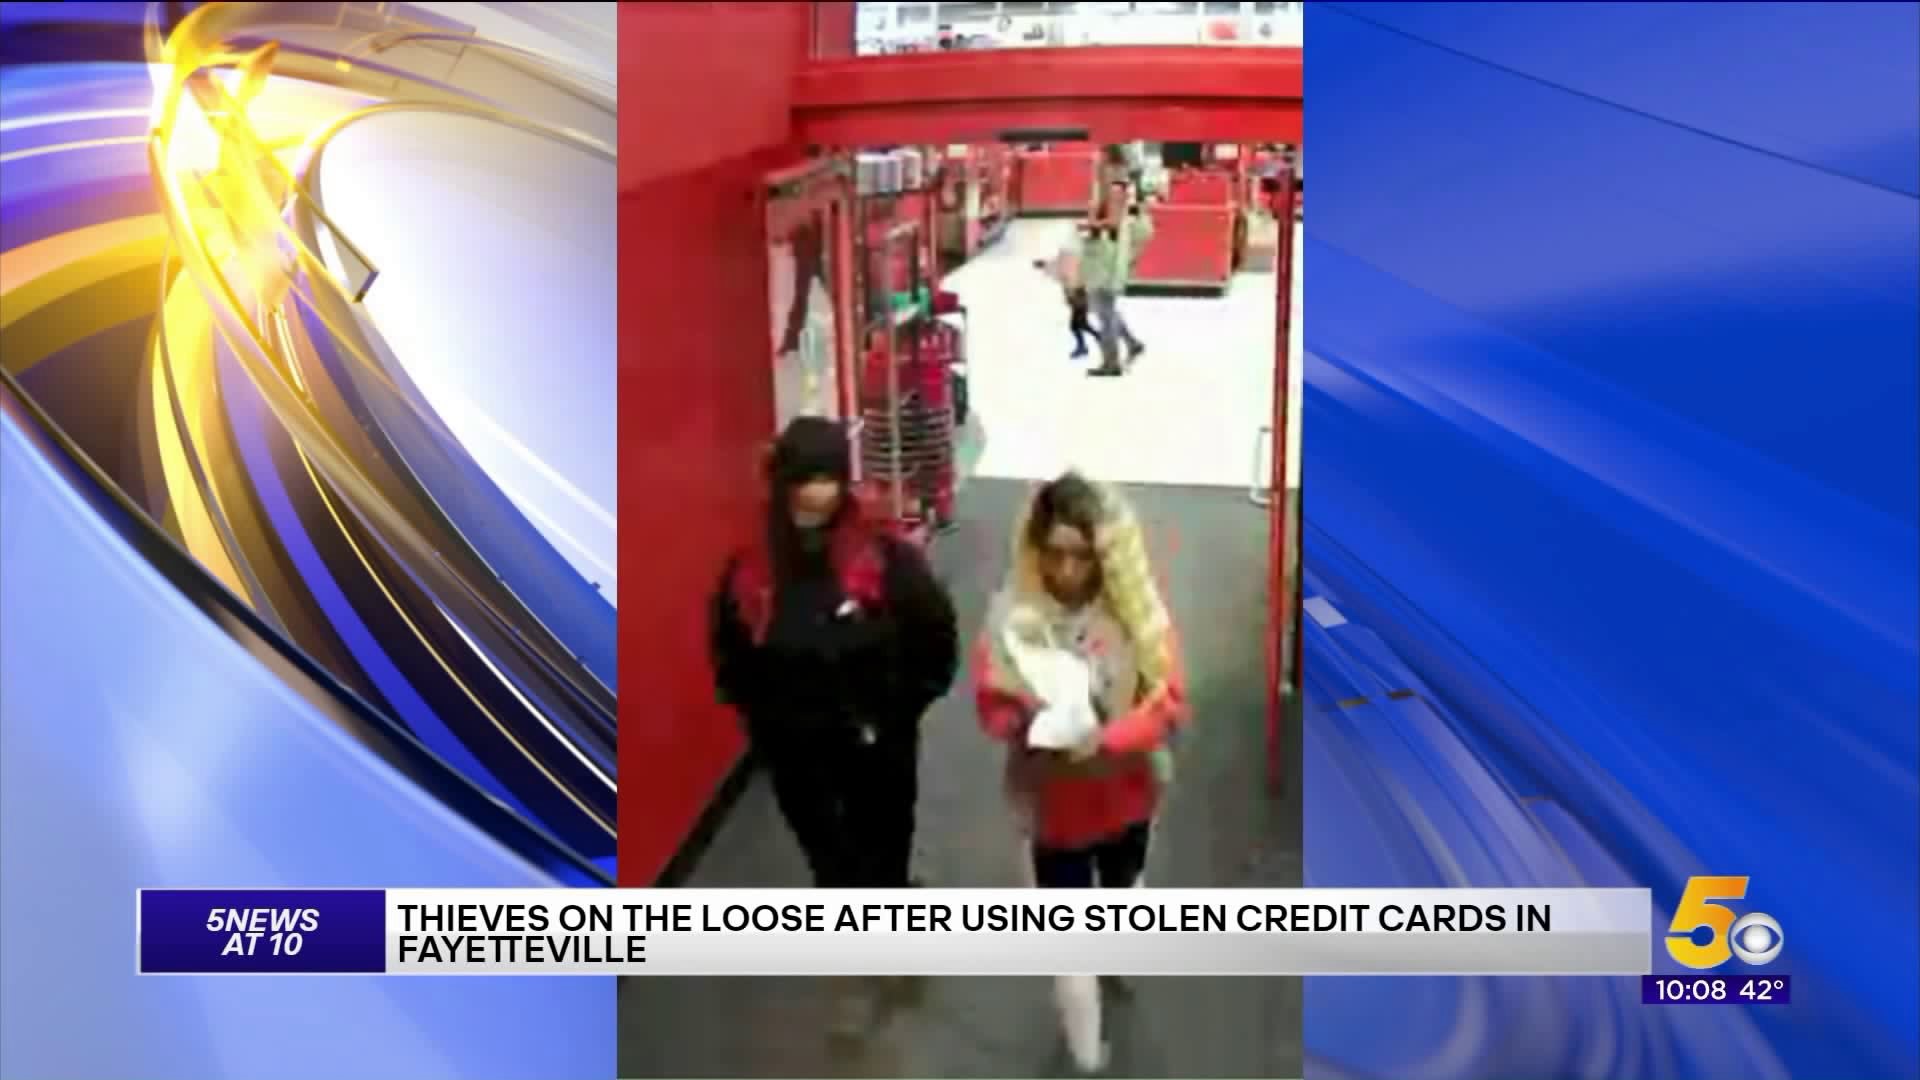 Thieves On The Loose After Using Stolen Credit Cards In Fayetteville